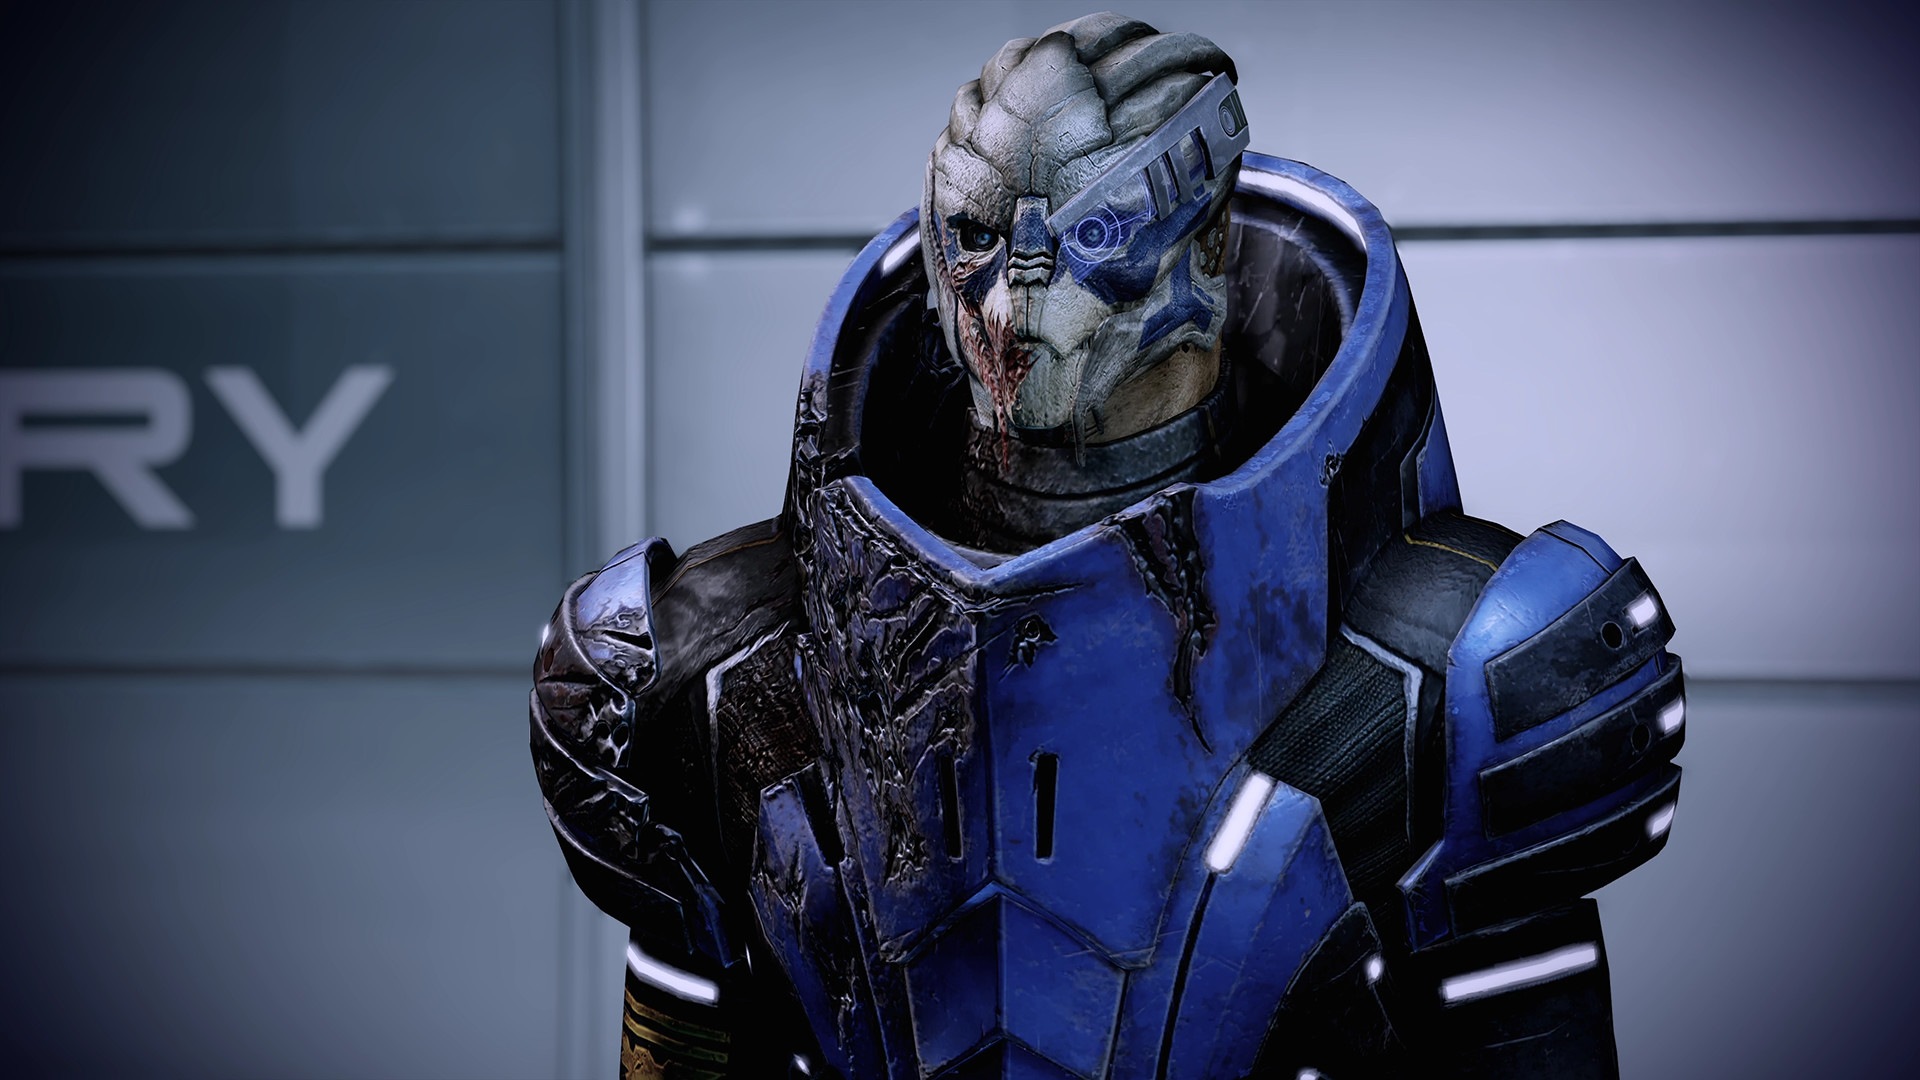  Former Mass Effect lead writer Mac Walters says the success of the Legendary Edition helped convince him to leave BioWare: 'I don't want to do any more Mass Effect after this' 